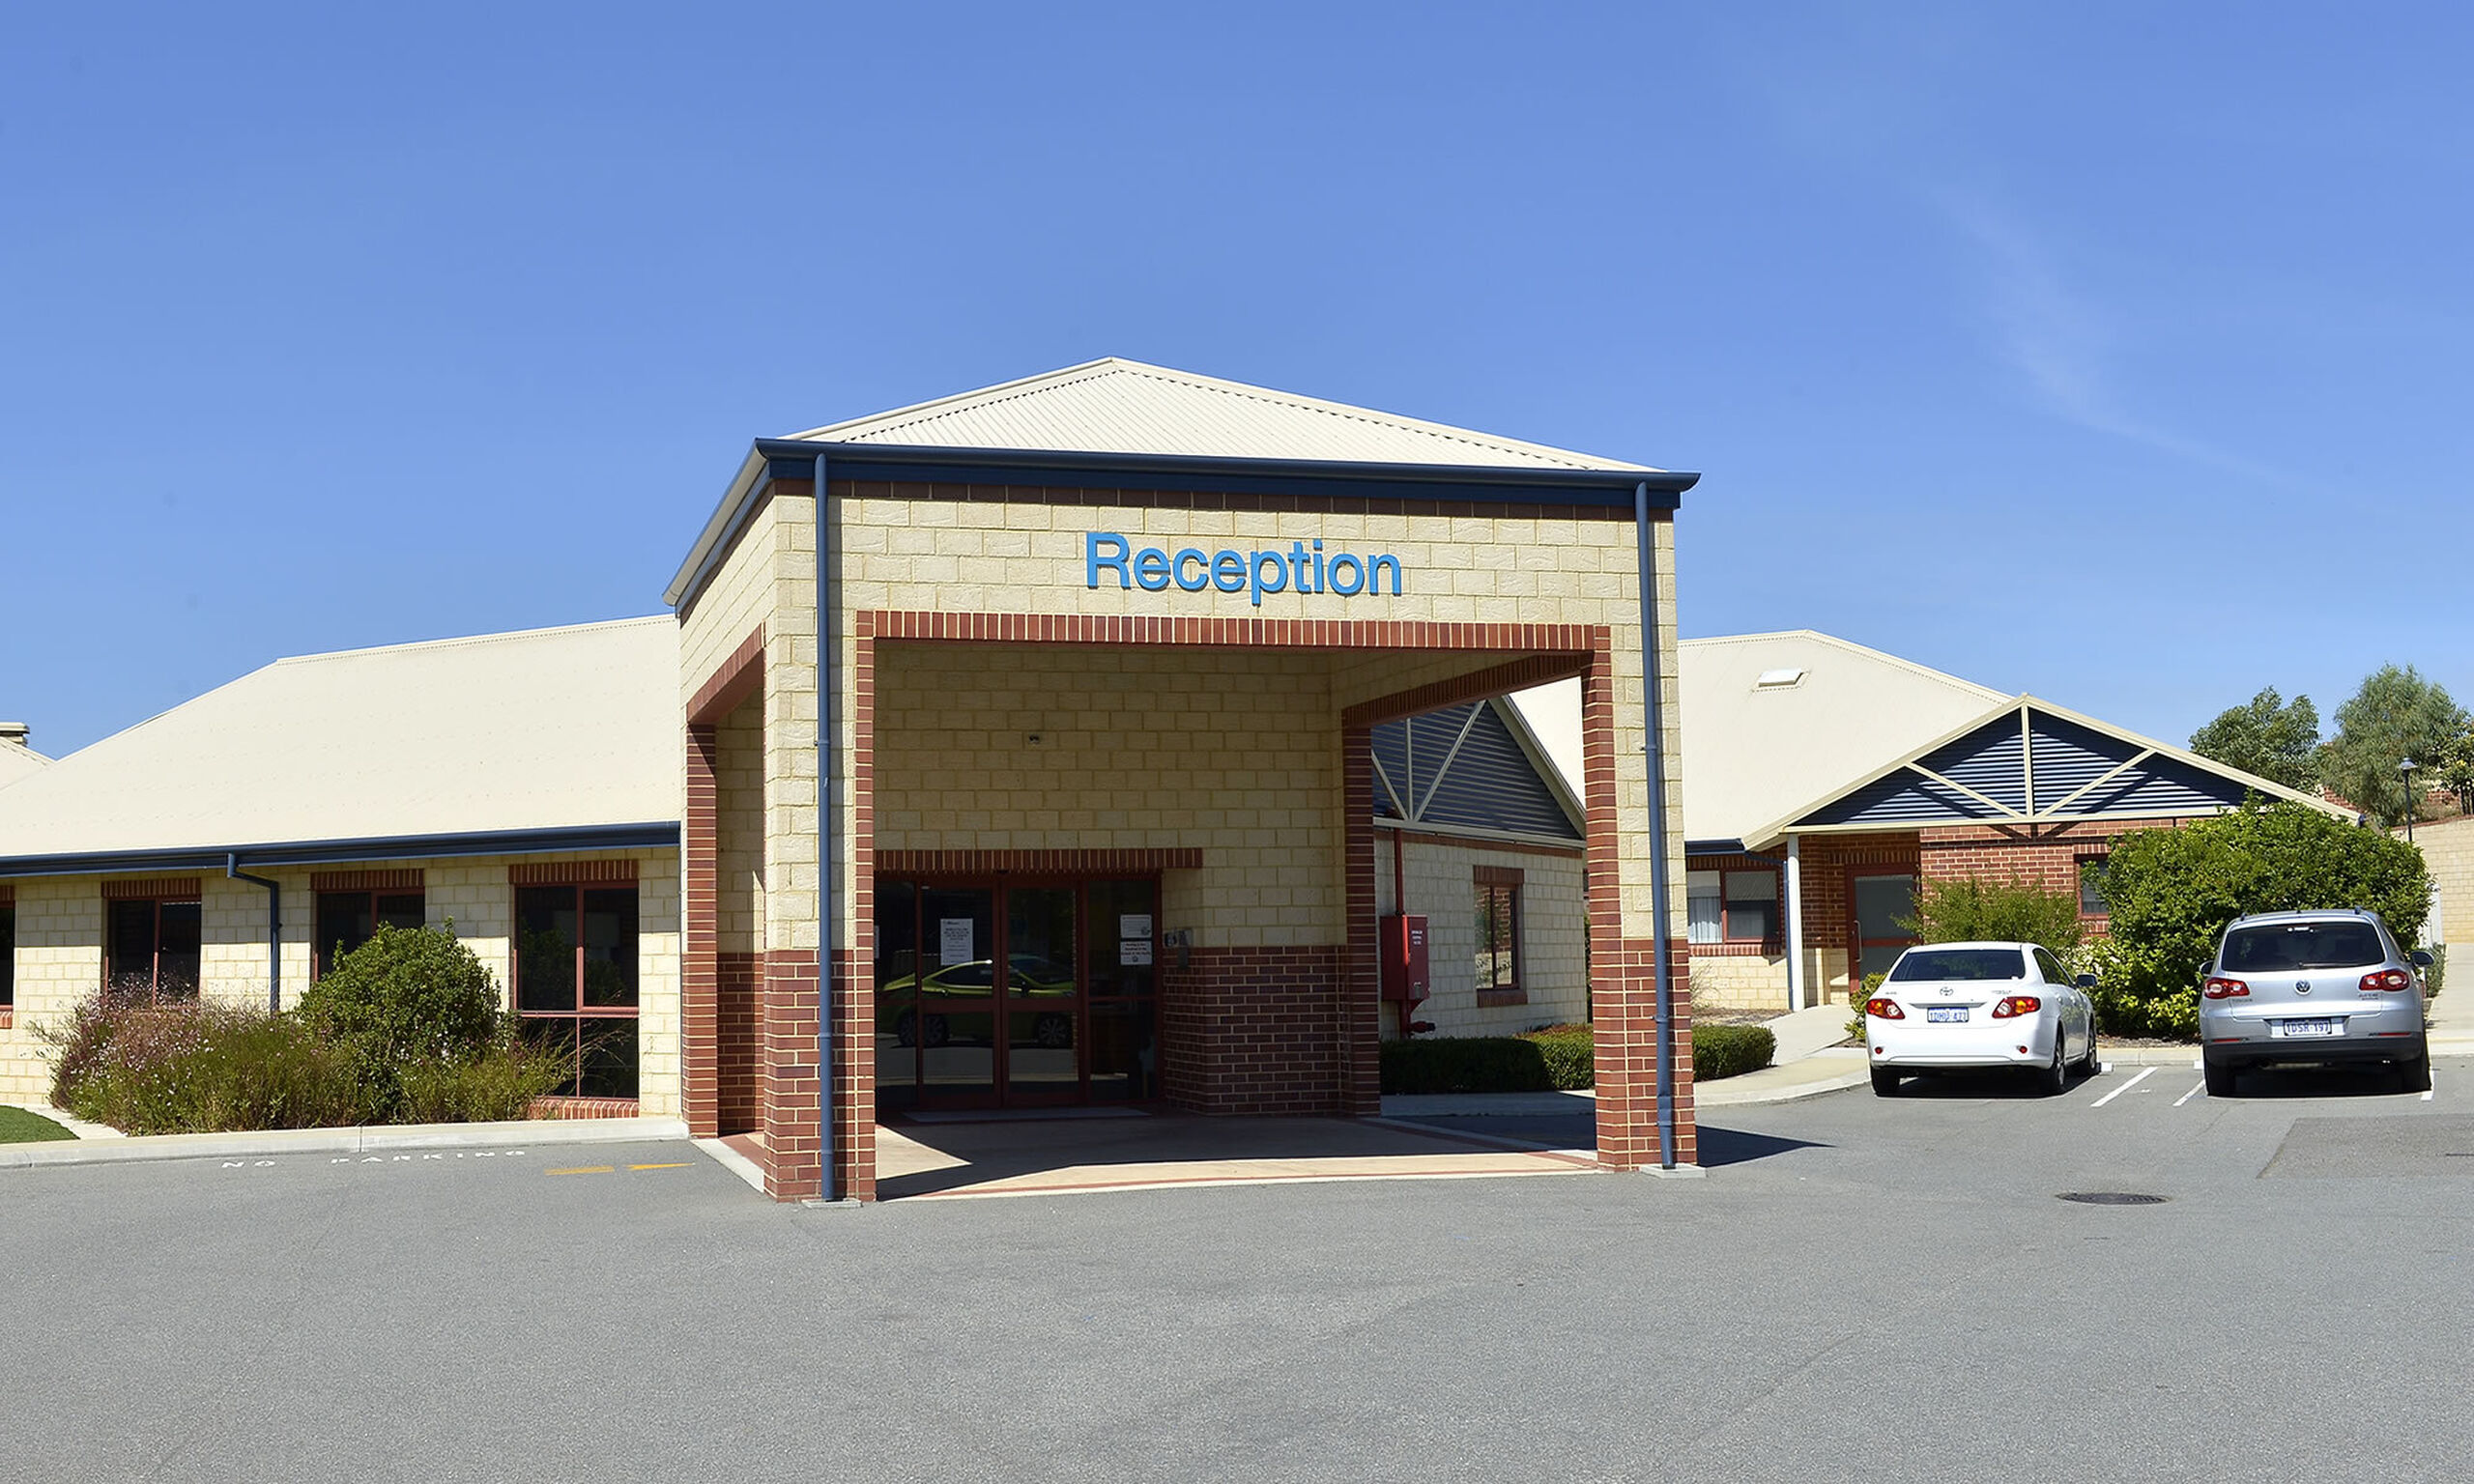 main entry for nursing home residents at baptistcare david buttfield centre aged care home in gwelup wa